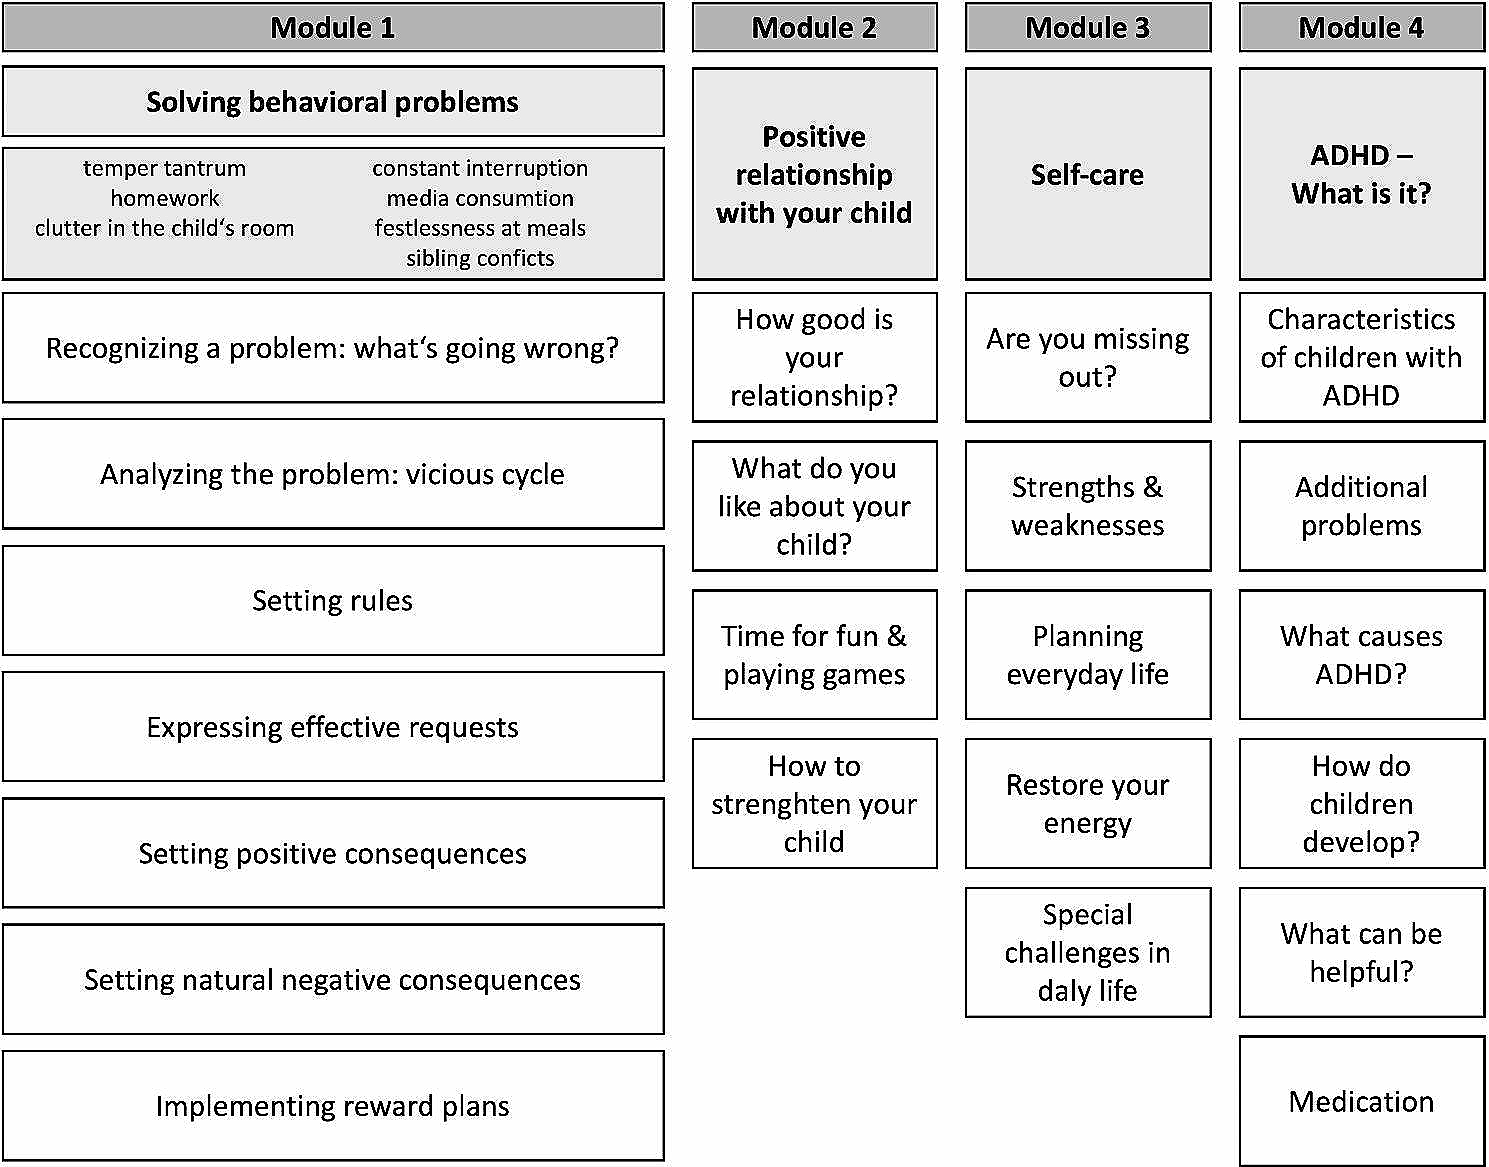 Acceptance and utilization of web-based self-help for caregivers of children with externalizing disorders